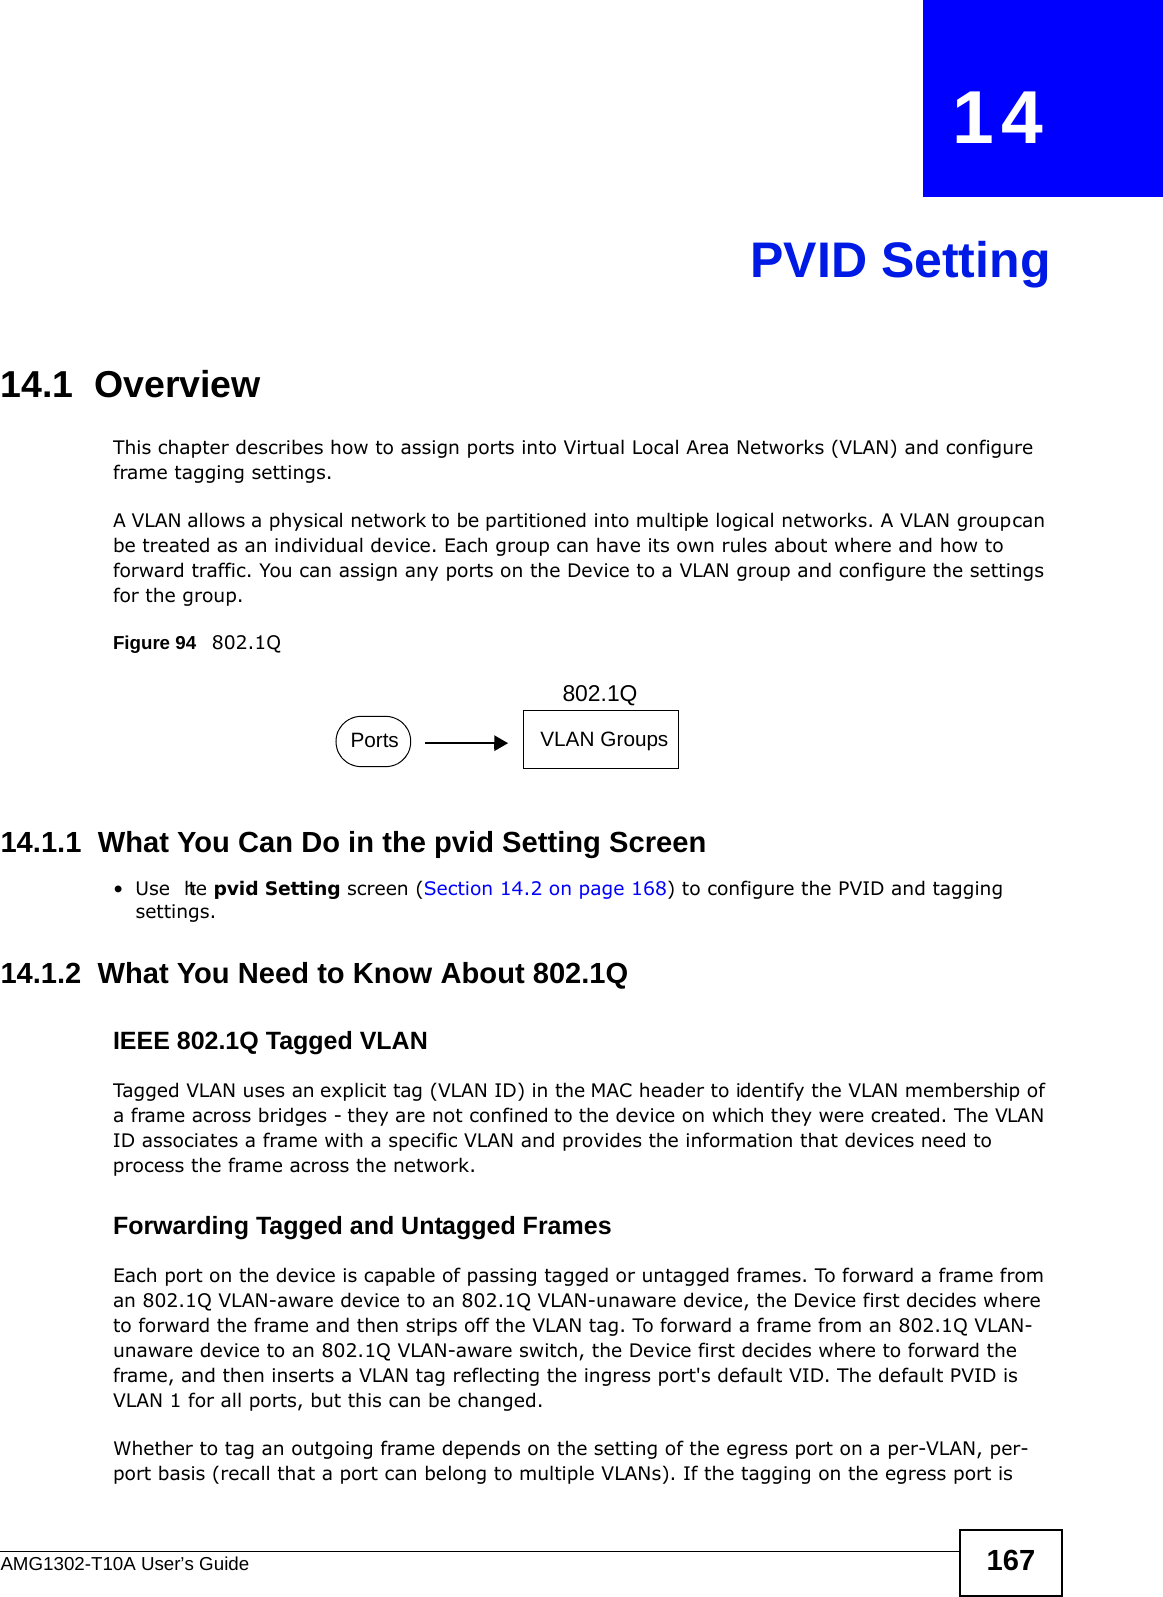 AMG1302-T10A User’s Guide 167CHAPTER   14PVID Setting14.1  OverviewThis chapter describes how to assign ports into Virtual Local Area Networks (VLAN) and configure frame tagging settings.A VLAN allows a physical network to be partitioned into multiple logical networks. A VLAN group can be treated as an individual device. Each group can have its own rules about where and how to forward traffic. You can assign any ports on the Device to a VLAN group and configure the settings for the group.Figure 94   802.1Q 14.1.1  What You Can Do in the pvid Setting Screen•Use  the pvid Setting screen (Section 14.2 on page 168) to configure the PVID and tagging settings. 14.1.2  What You Need to Know About 802.1QIEEE 802.1Q Tagged VLANTagged VLAN uses an explicit tag (VLAN ID) in the MAC header to identify the VLAN membership of a frame across bridges - they are not confined to the device on which they were created. The VLAN ID associates a frame with a specific VLAN and provides the information that devices need to process the frame across the network.Forwarding Tagged and Untagged FramesEach port on the device is capable of passing tagged or untagged frames. To forward a frame from an 802.1Q VLAN-aware device to an 802.1Q VLAN-unaware device, the Device first decides where to forward the frame and then strips off the VLAN tag. To forward a frame from an 802.1Q VLAN-unaware device to an 802.1Q VLAN-aware switch, the Device first decides where to forward the frame, and then inserts a VLAN tag reflecting the ingress port&apos;s default VID. The default PVID is VLAN 1 for all ports, but this can be changed.Whether to tag an outgoing frame depends on the setting of the egress port on a per-VLAN, per-port basis (recall that a port can belong to multiple VLANs). If the tagging on the egress port is Ports VLAN Groups802.1Q